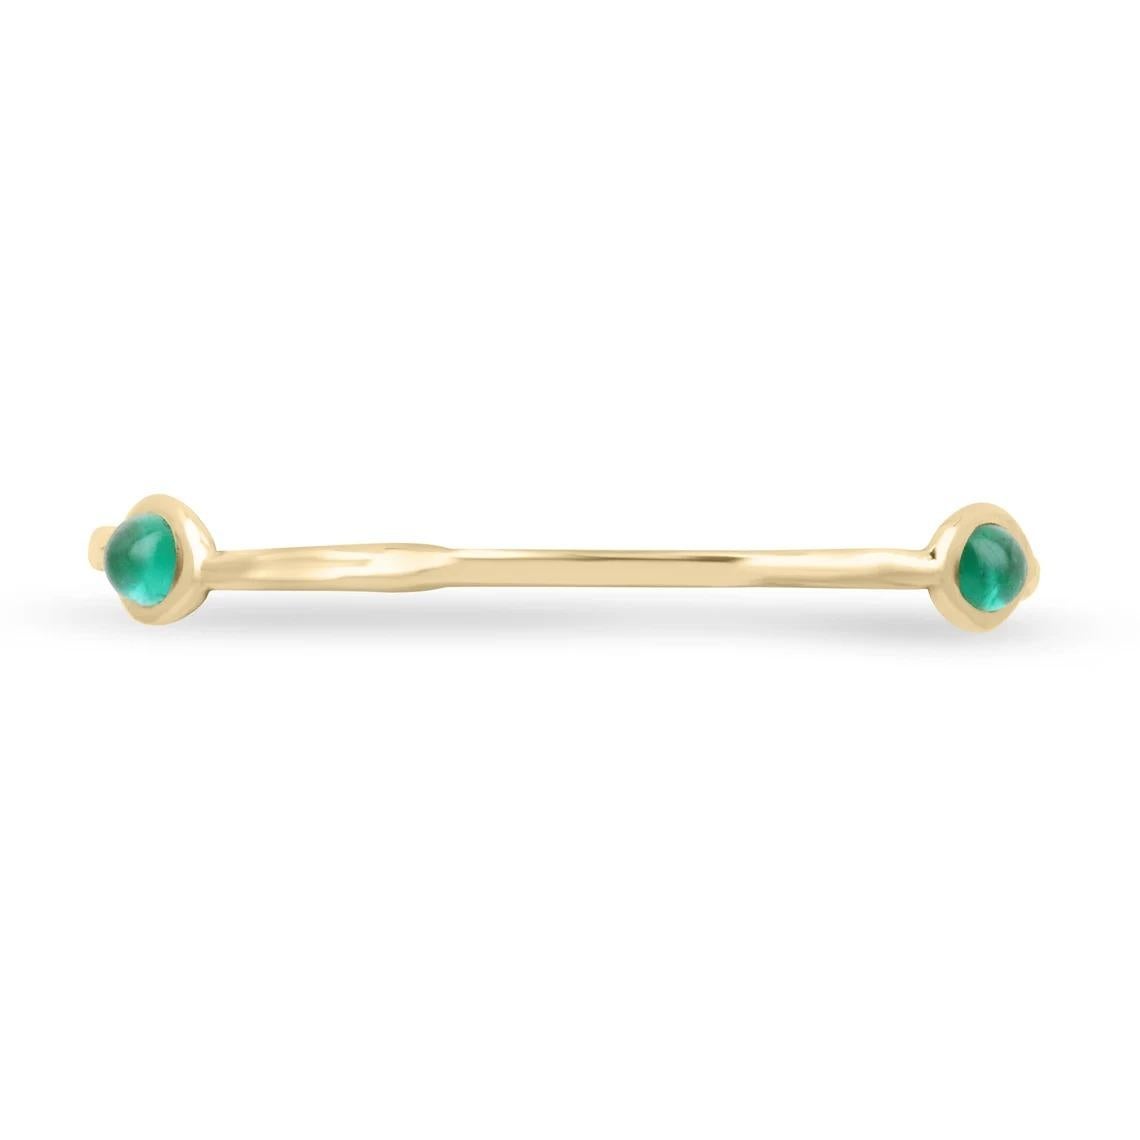 Featured is a stunning high-quality natural emerald cabochon bangle bracelet. This special piece showcases three stunning oval-shaped natural cabochon cut emeralds, spread out evenly. Bezel set within an irregular-shaped gold bangle bracelet.